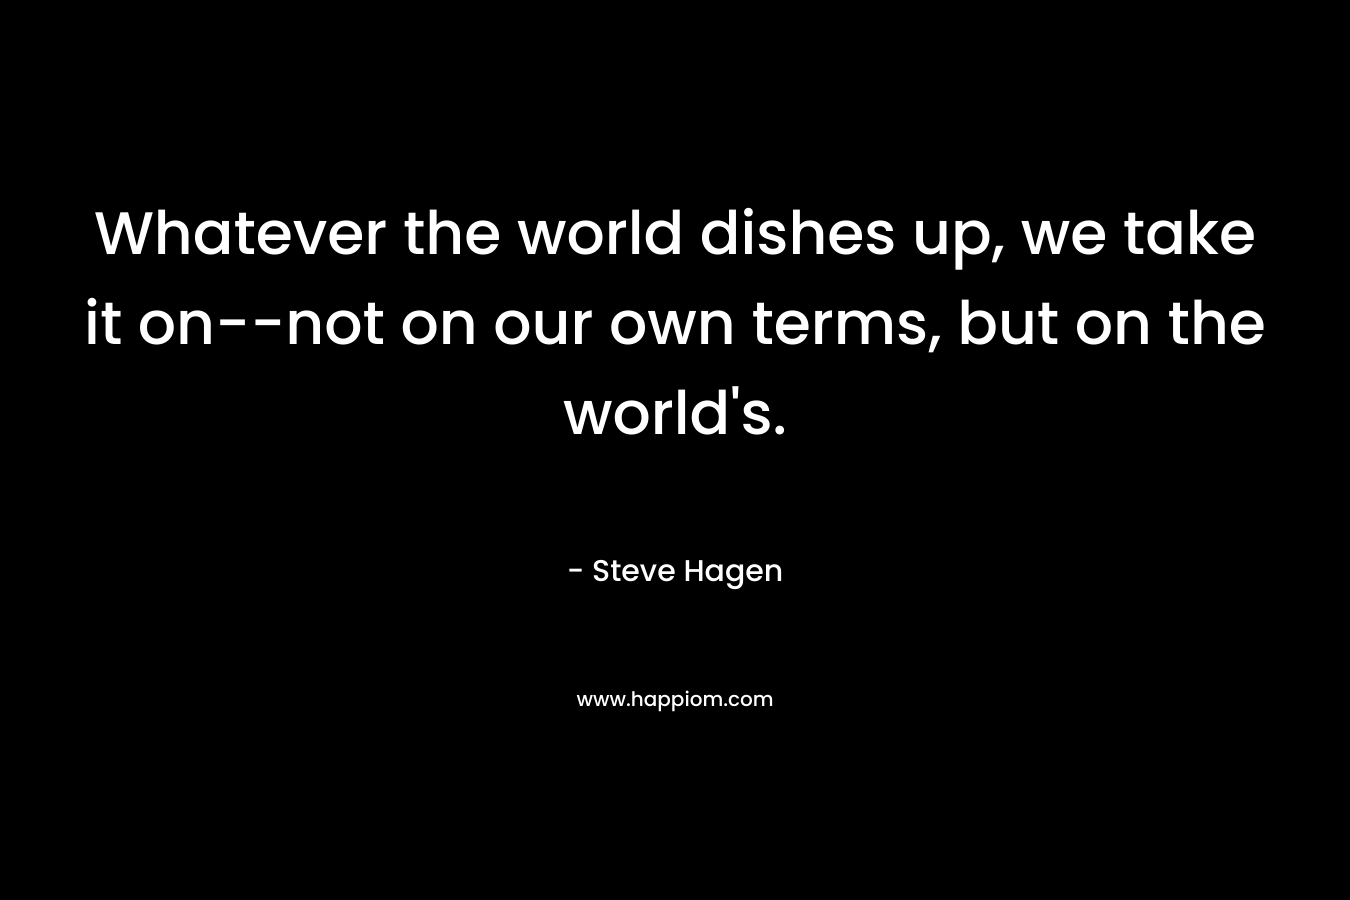 Whatever the world dishes up, we take it on--not on our own terms, but on the world's.